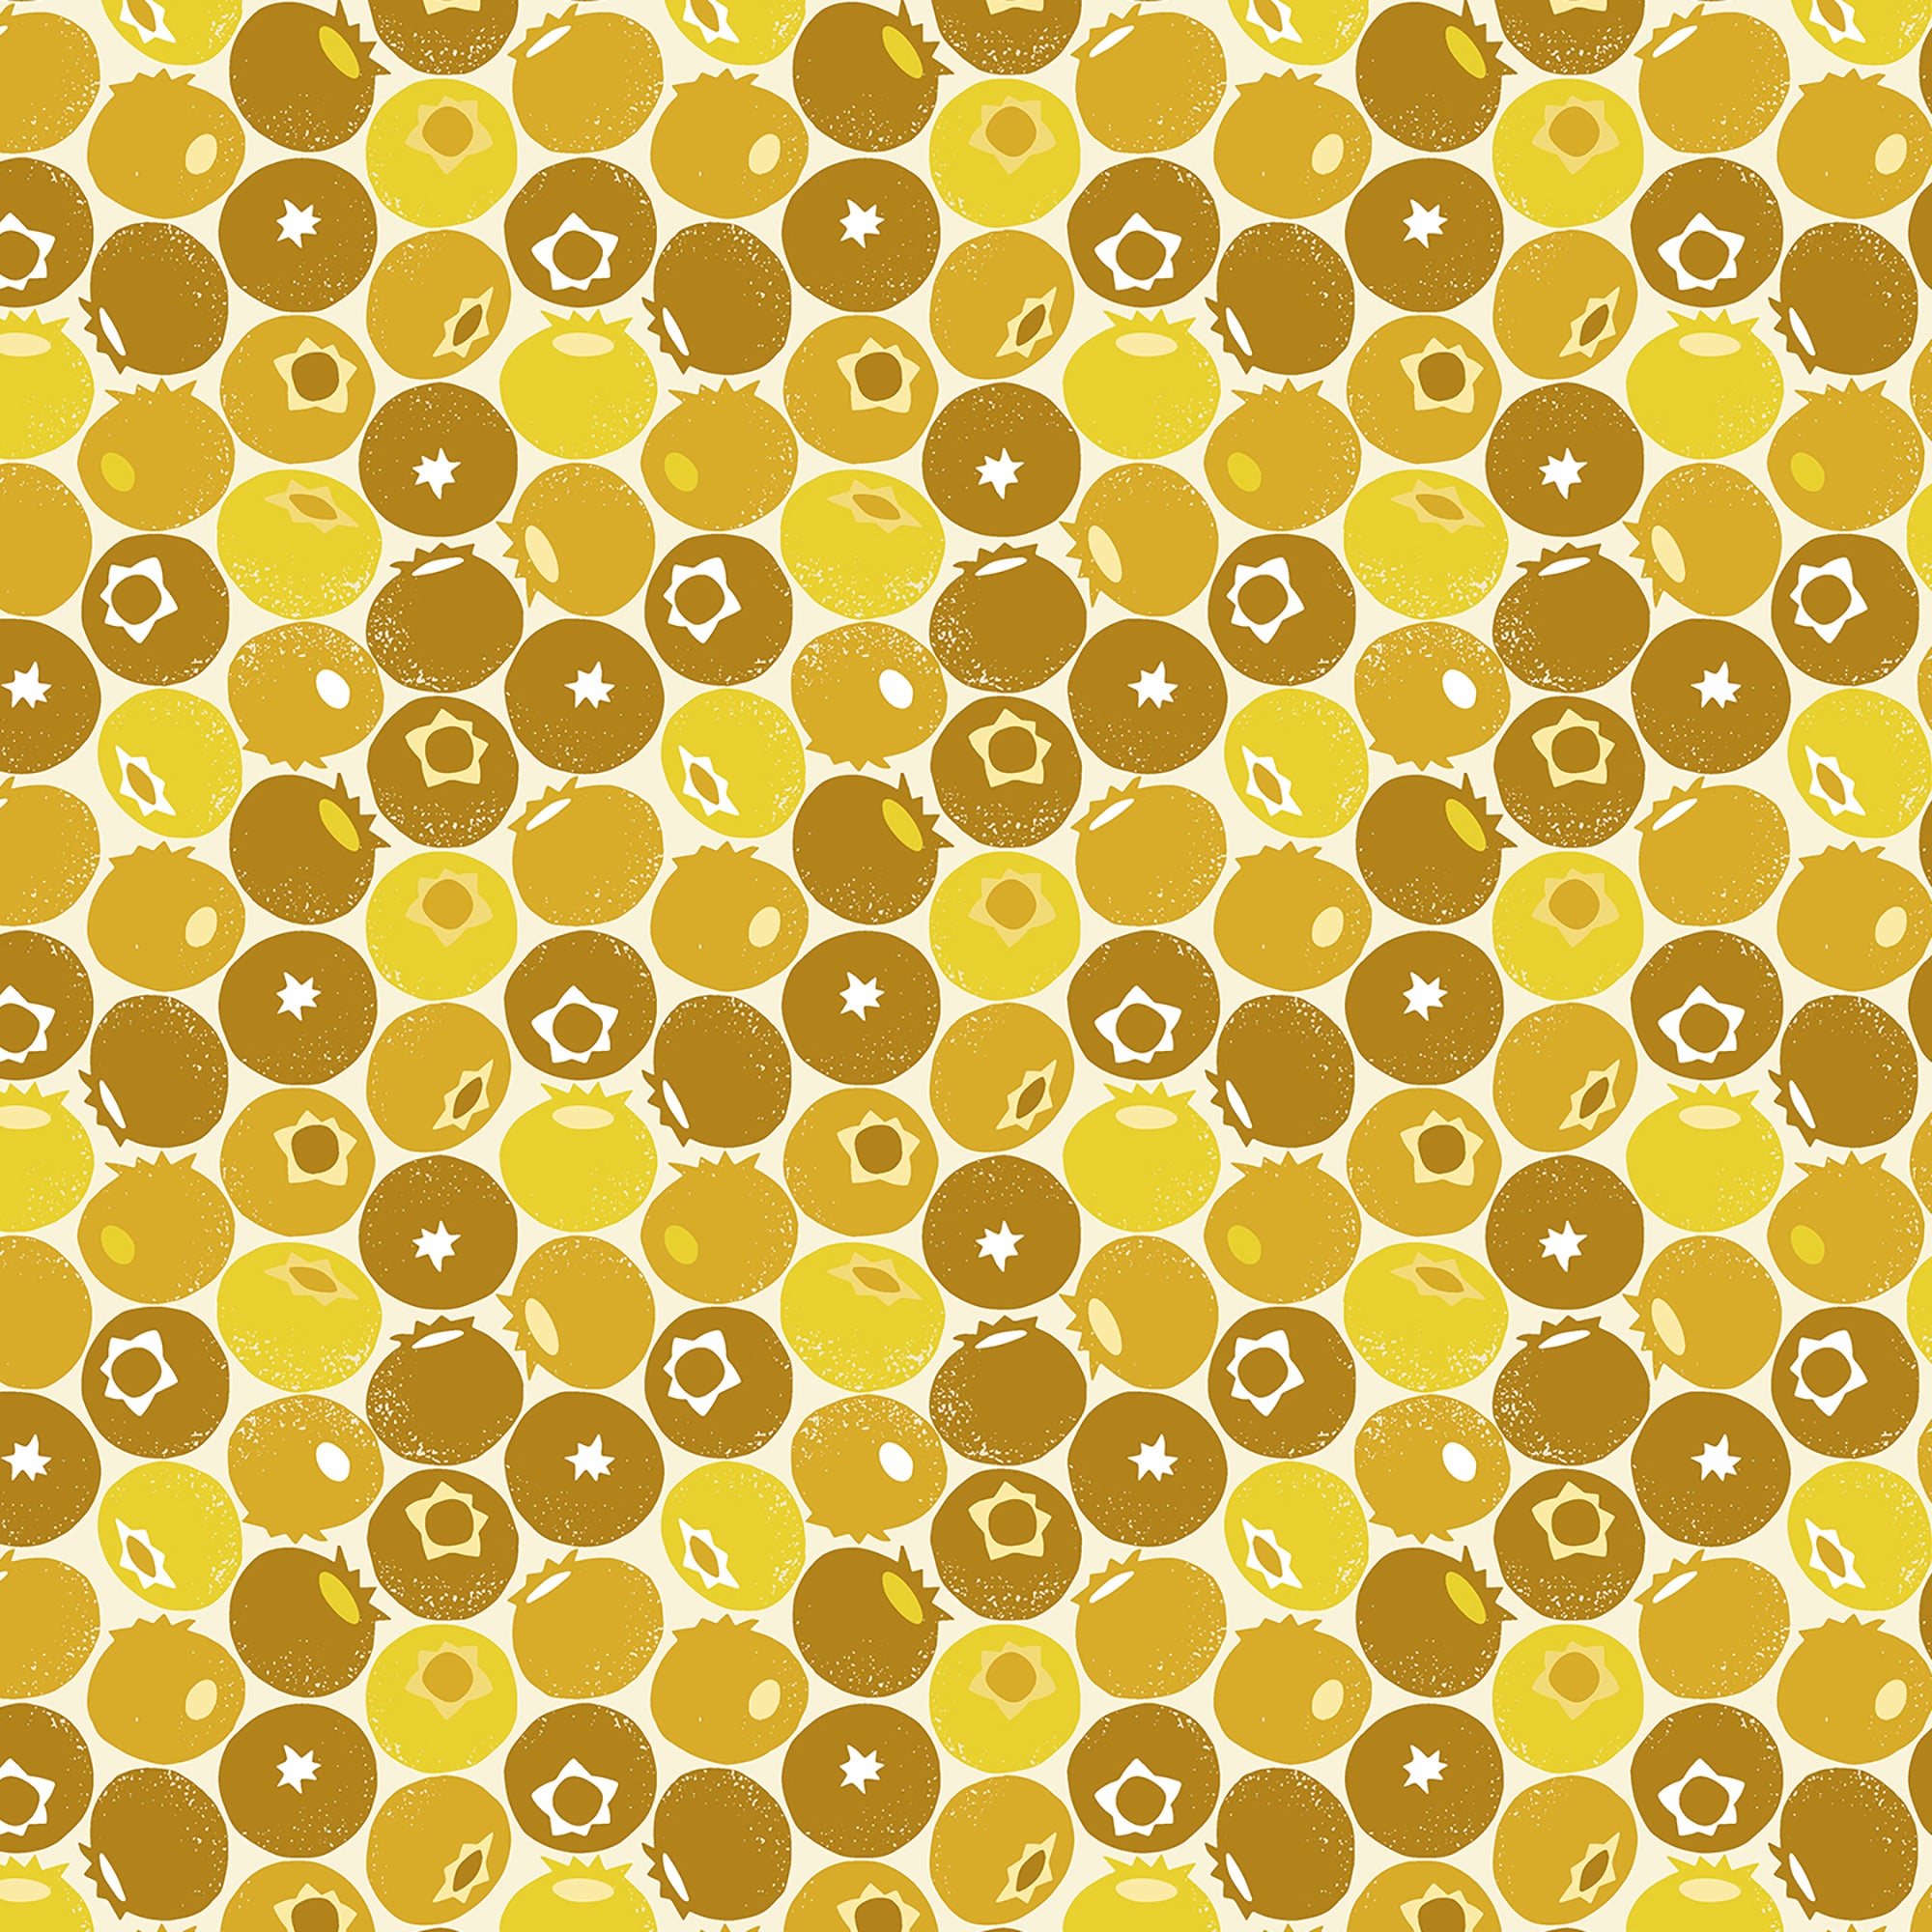 Under the Apple Tree - Blueberry Summer Yellow Fabric